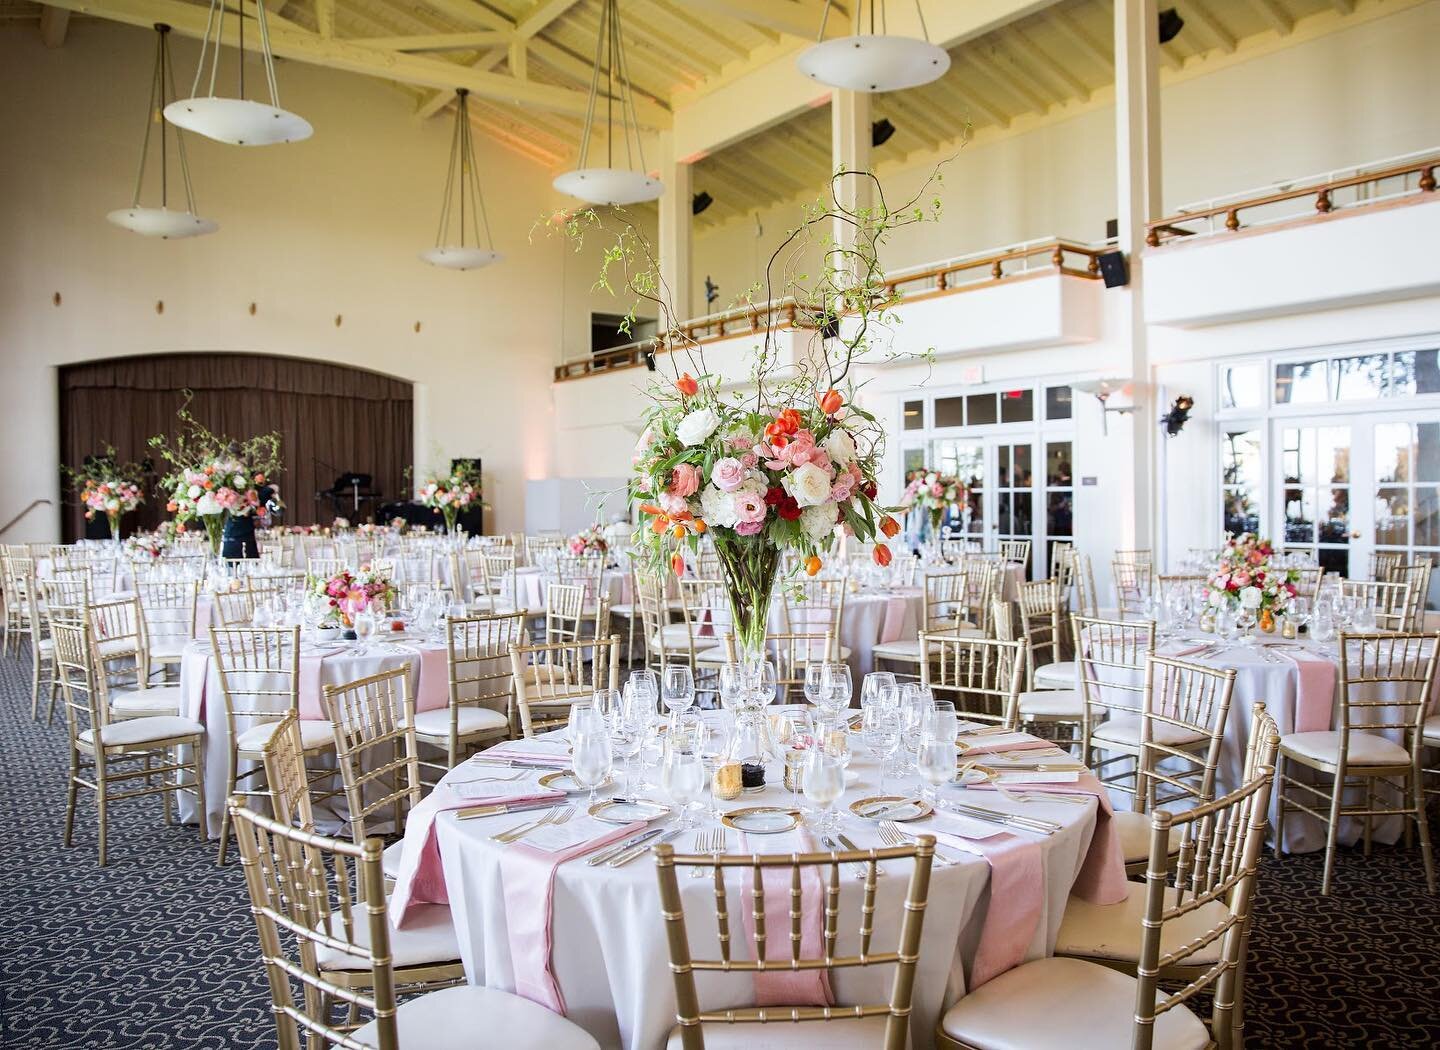 There are few things more exciting to a planner than a wedding reception room in the moments before the guests arrive. 

All of the details - from straightening forks to tucking away loose tablecloth edges - have been lovingly pored over and there is